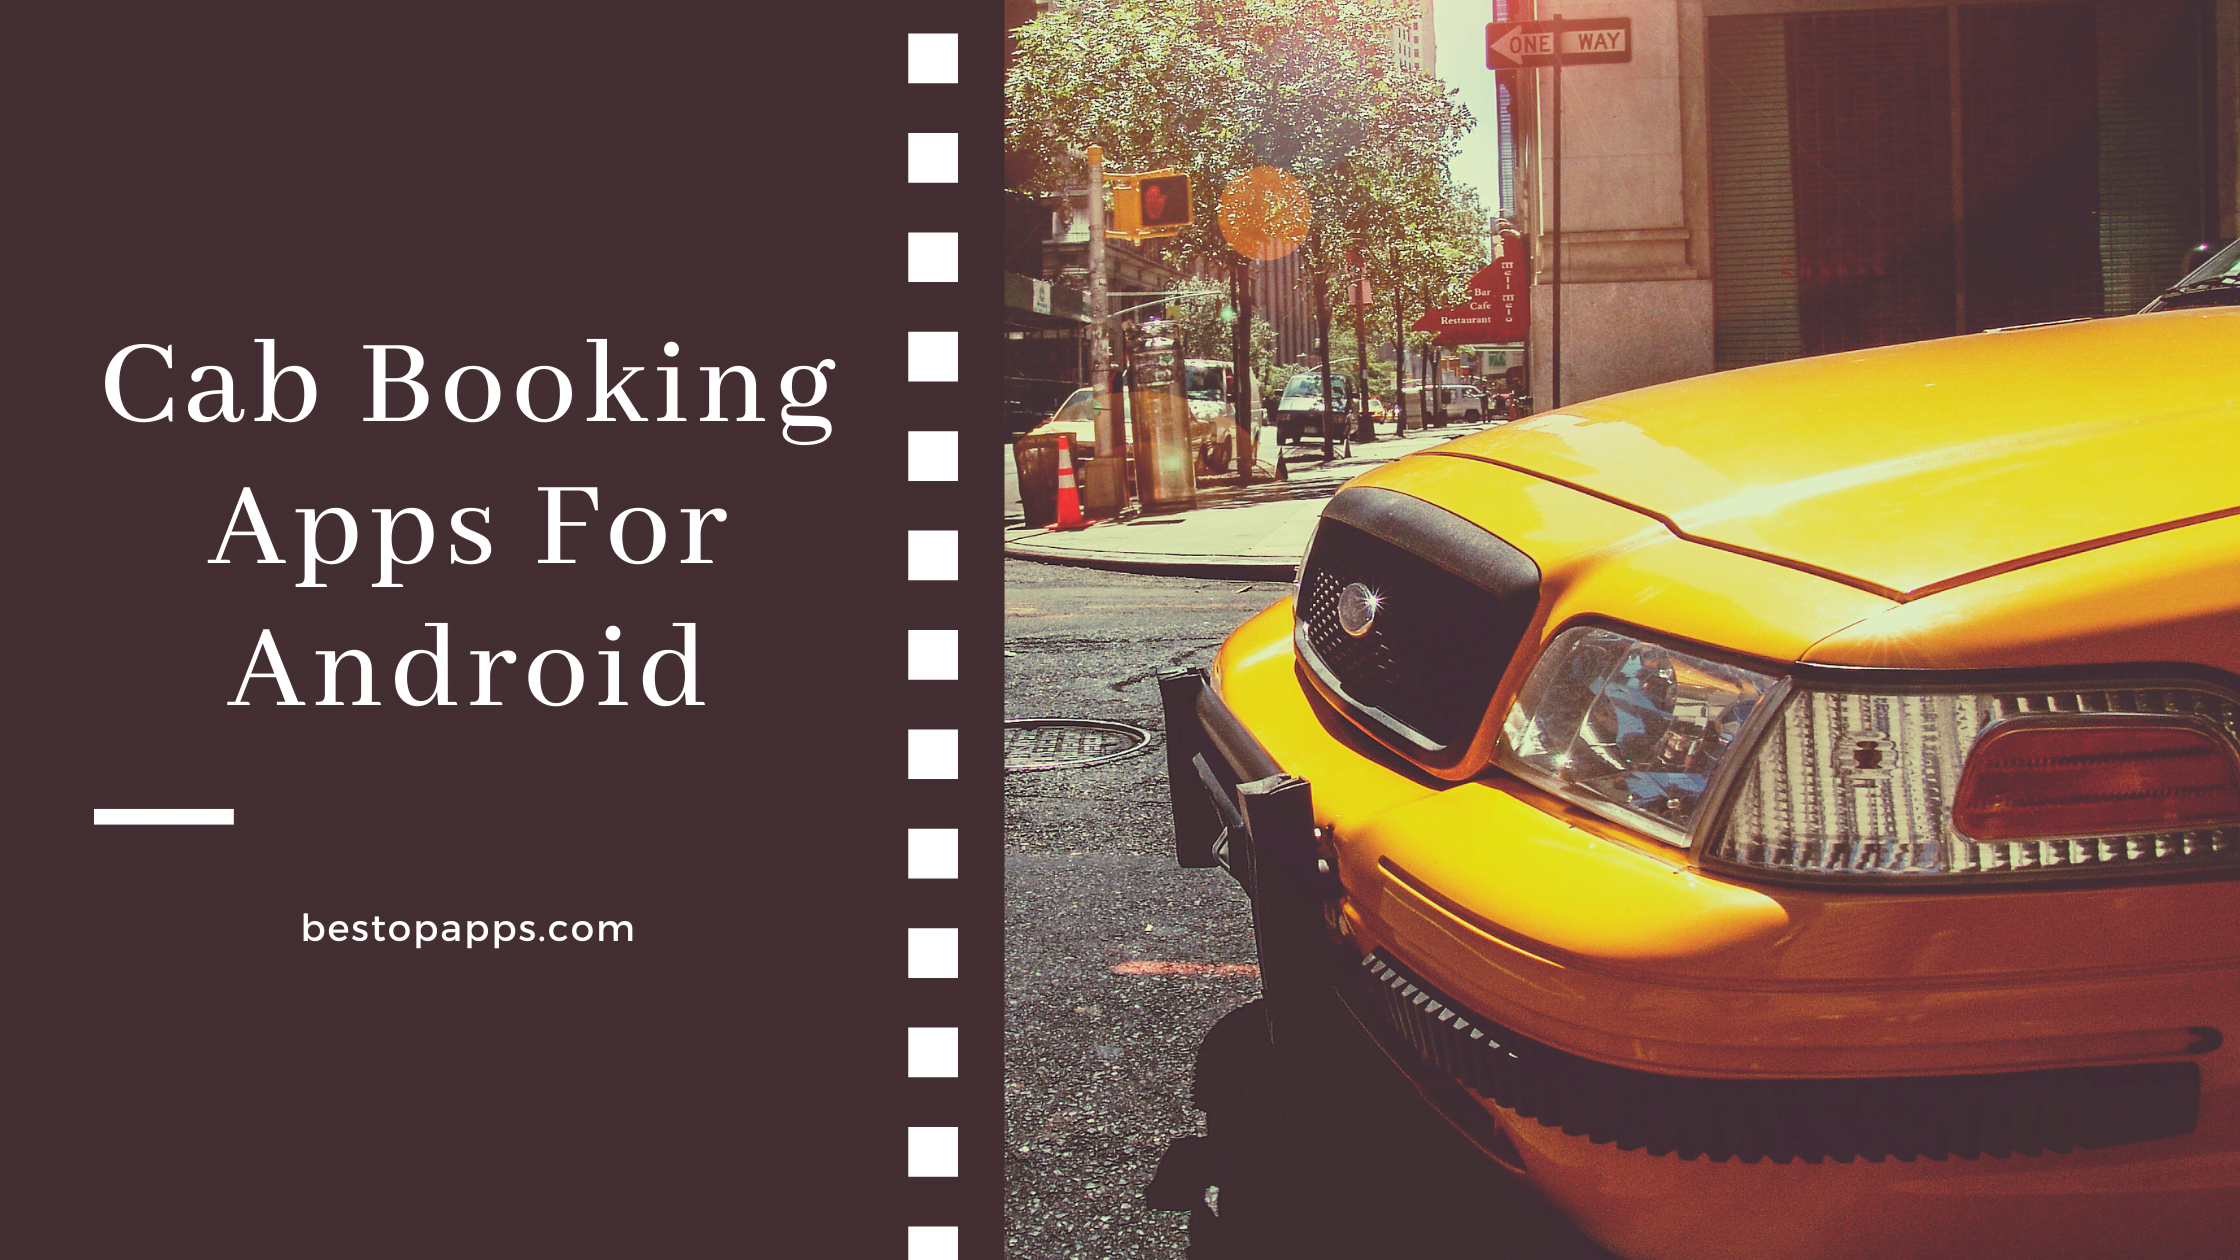 Cab Booking Apps For Android